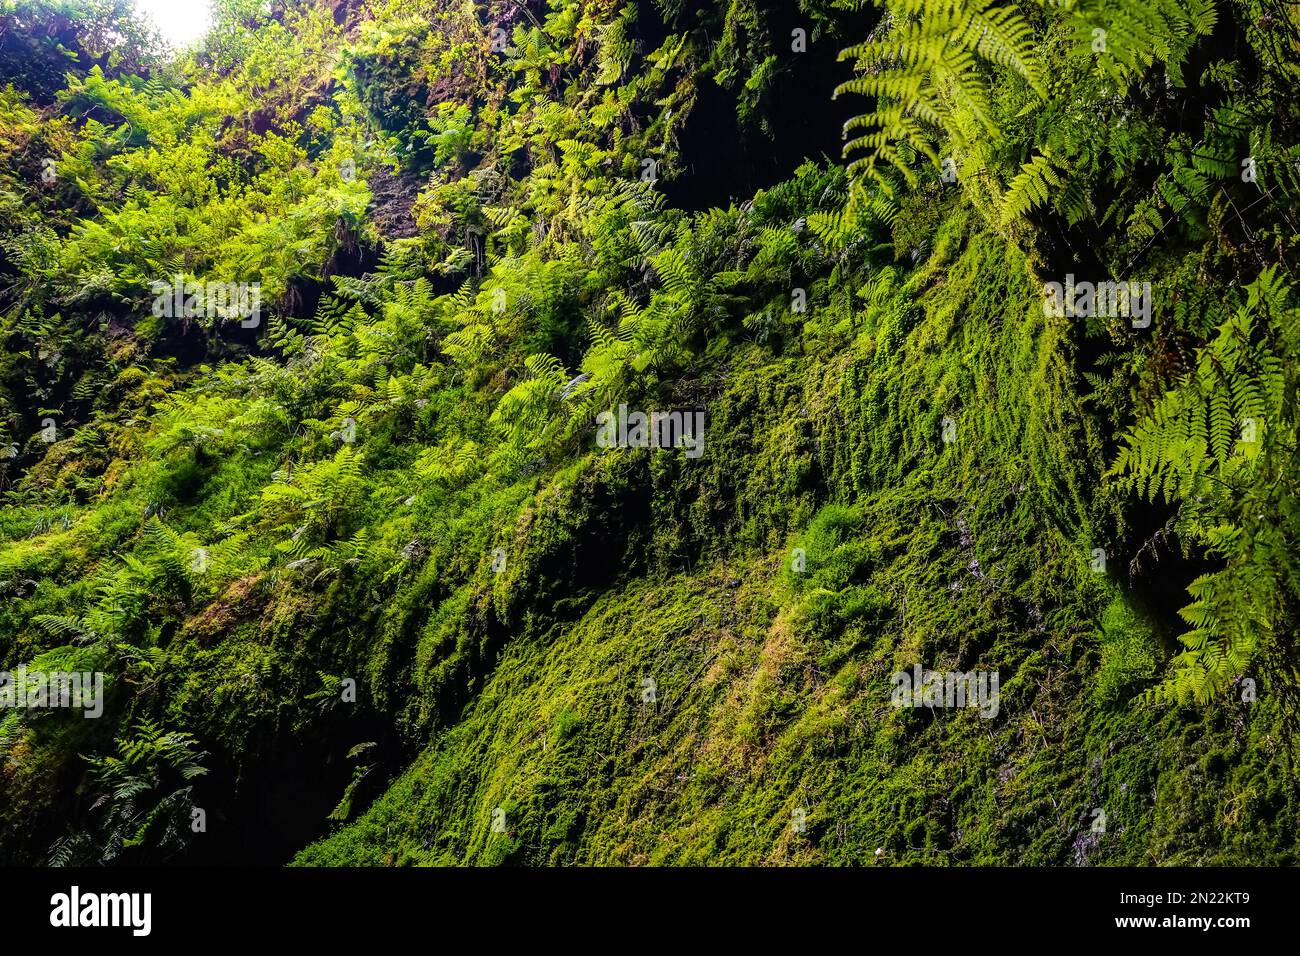 Fern and moss covered walls inside the Algar do Carvão a vertical lava tube dropping 300 feet from the surface accessible by a narrow staircase to a clear water pool at the bottom in the central mountains, Terceira Island, Azores, Portugal. Stock Photo